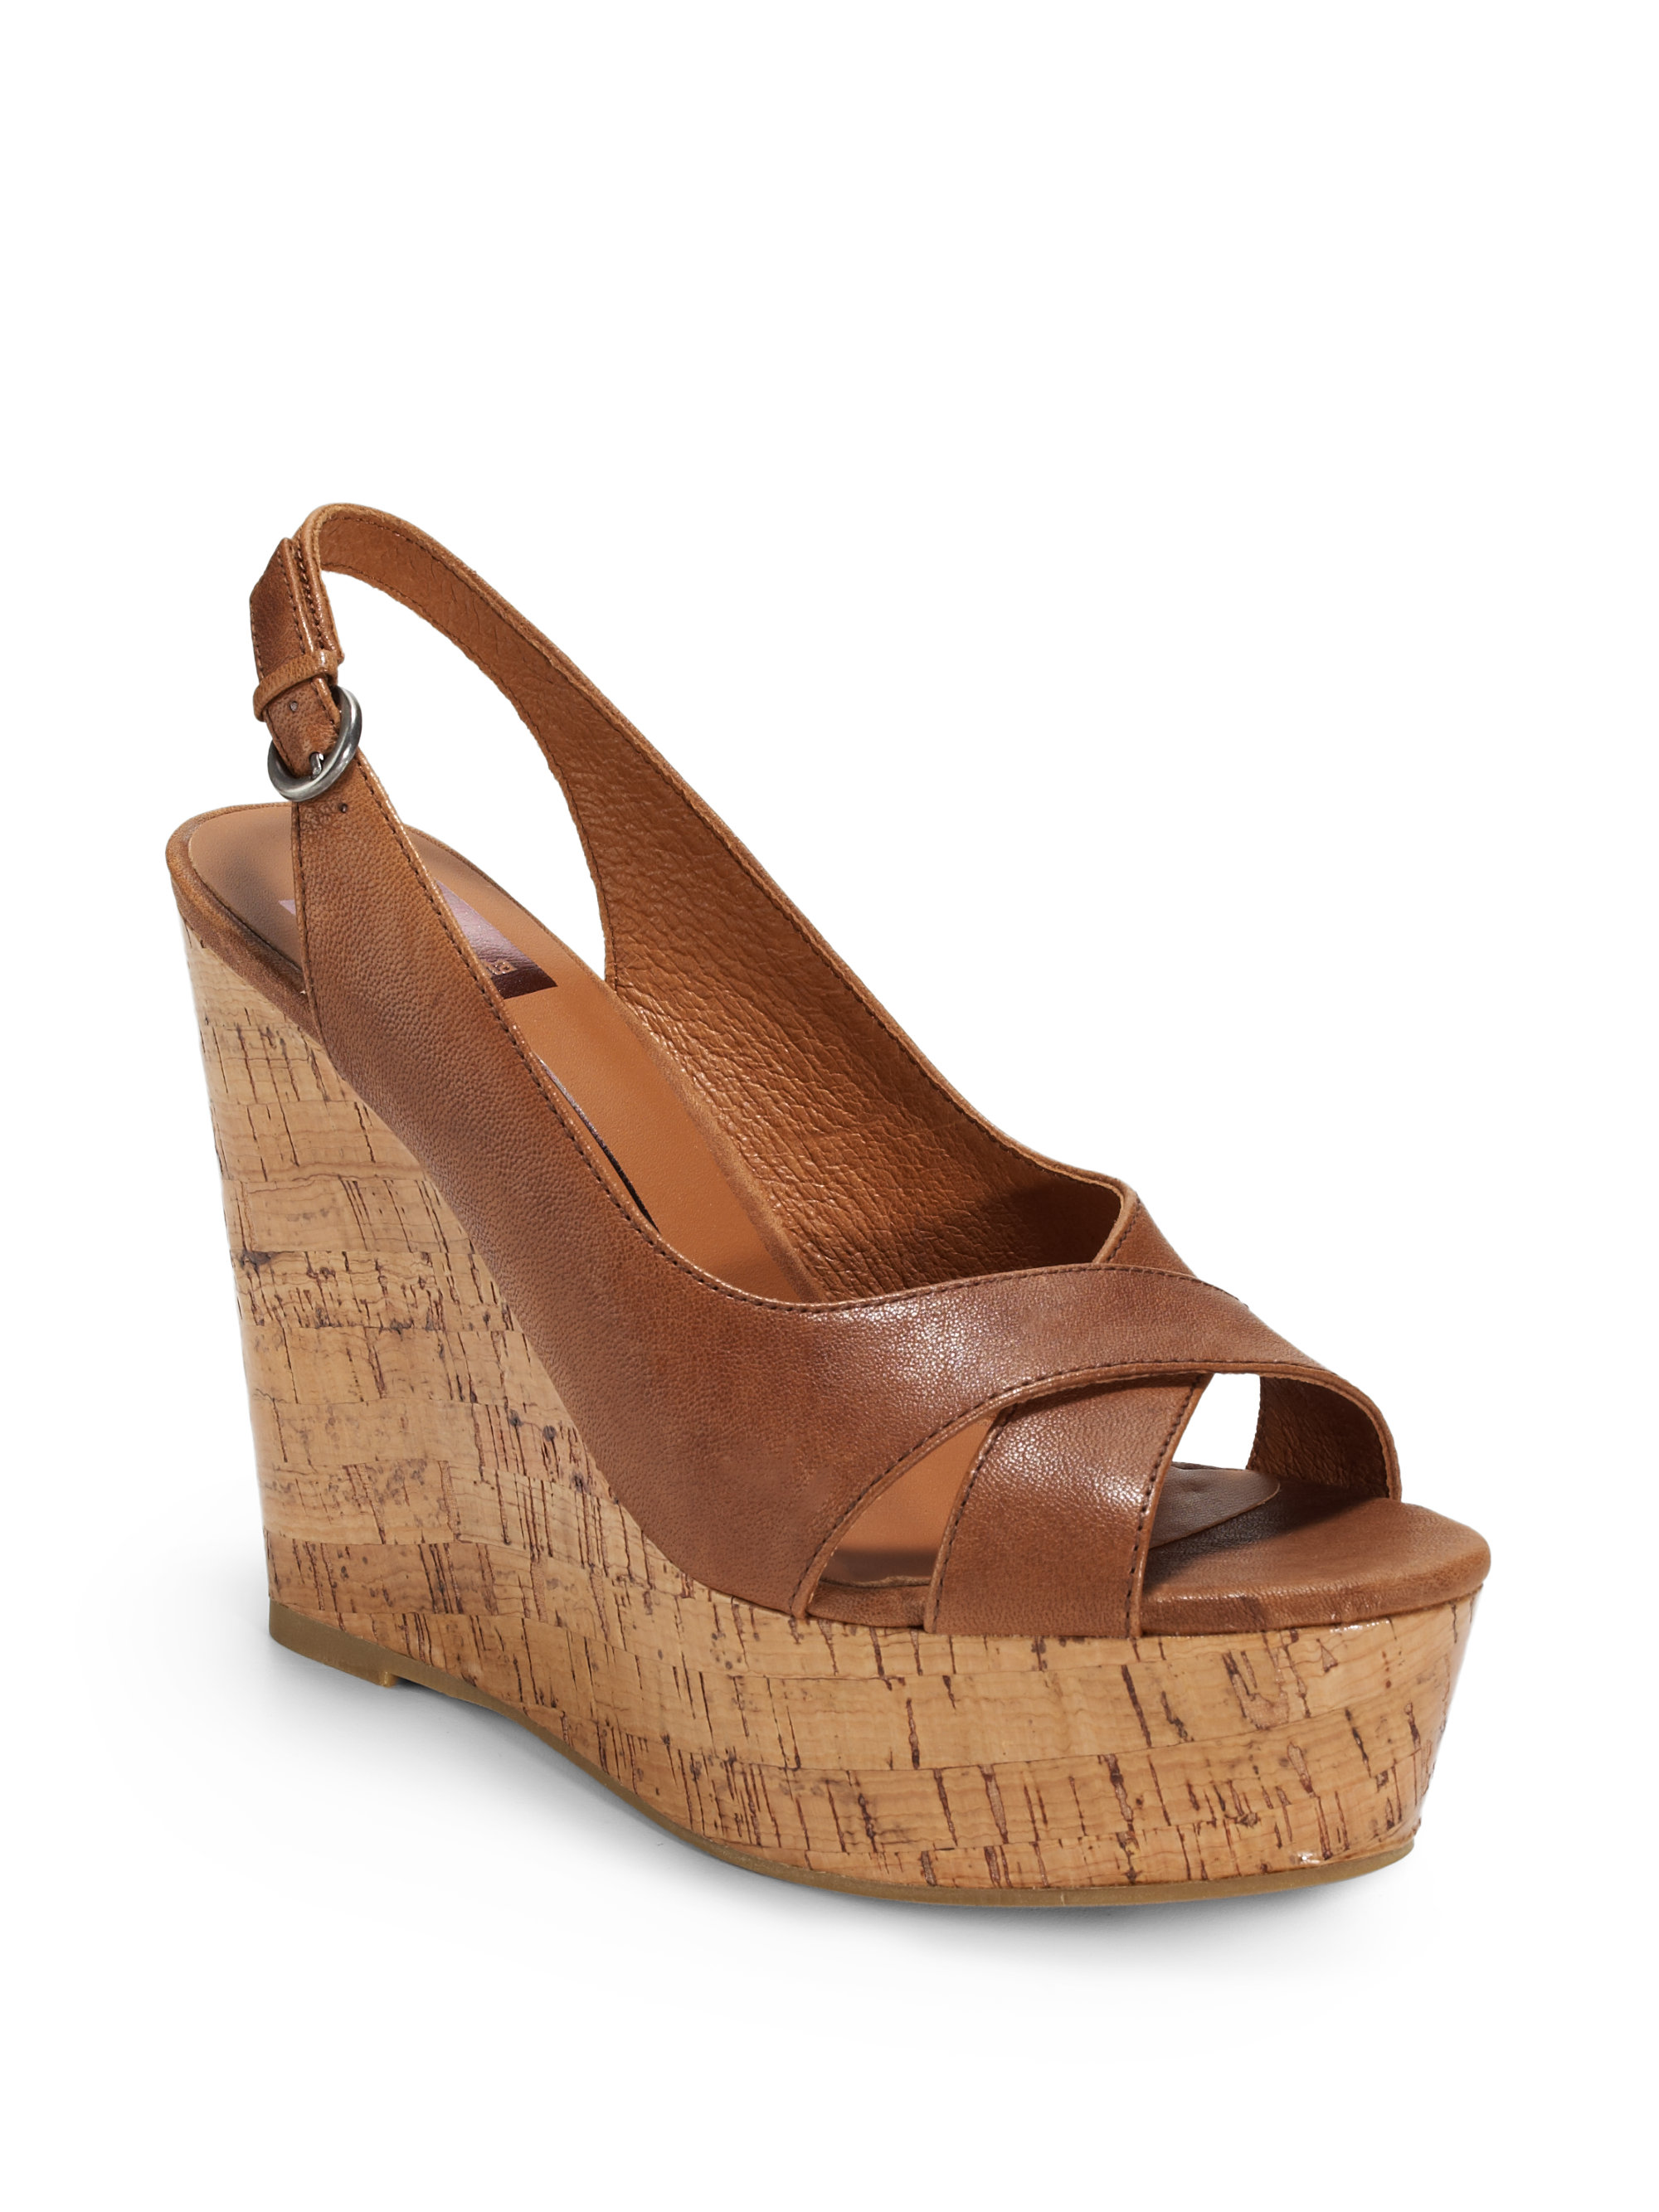 Lyst - Dolce Vita Jill Leather Slingback Wedge Sandals in Brown